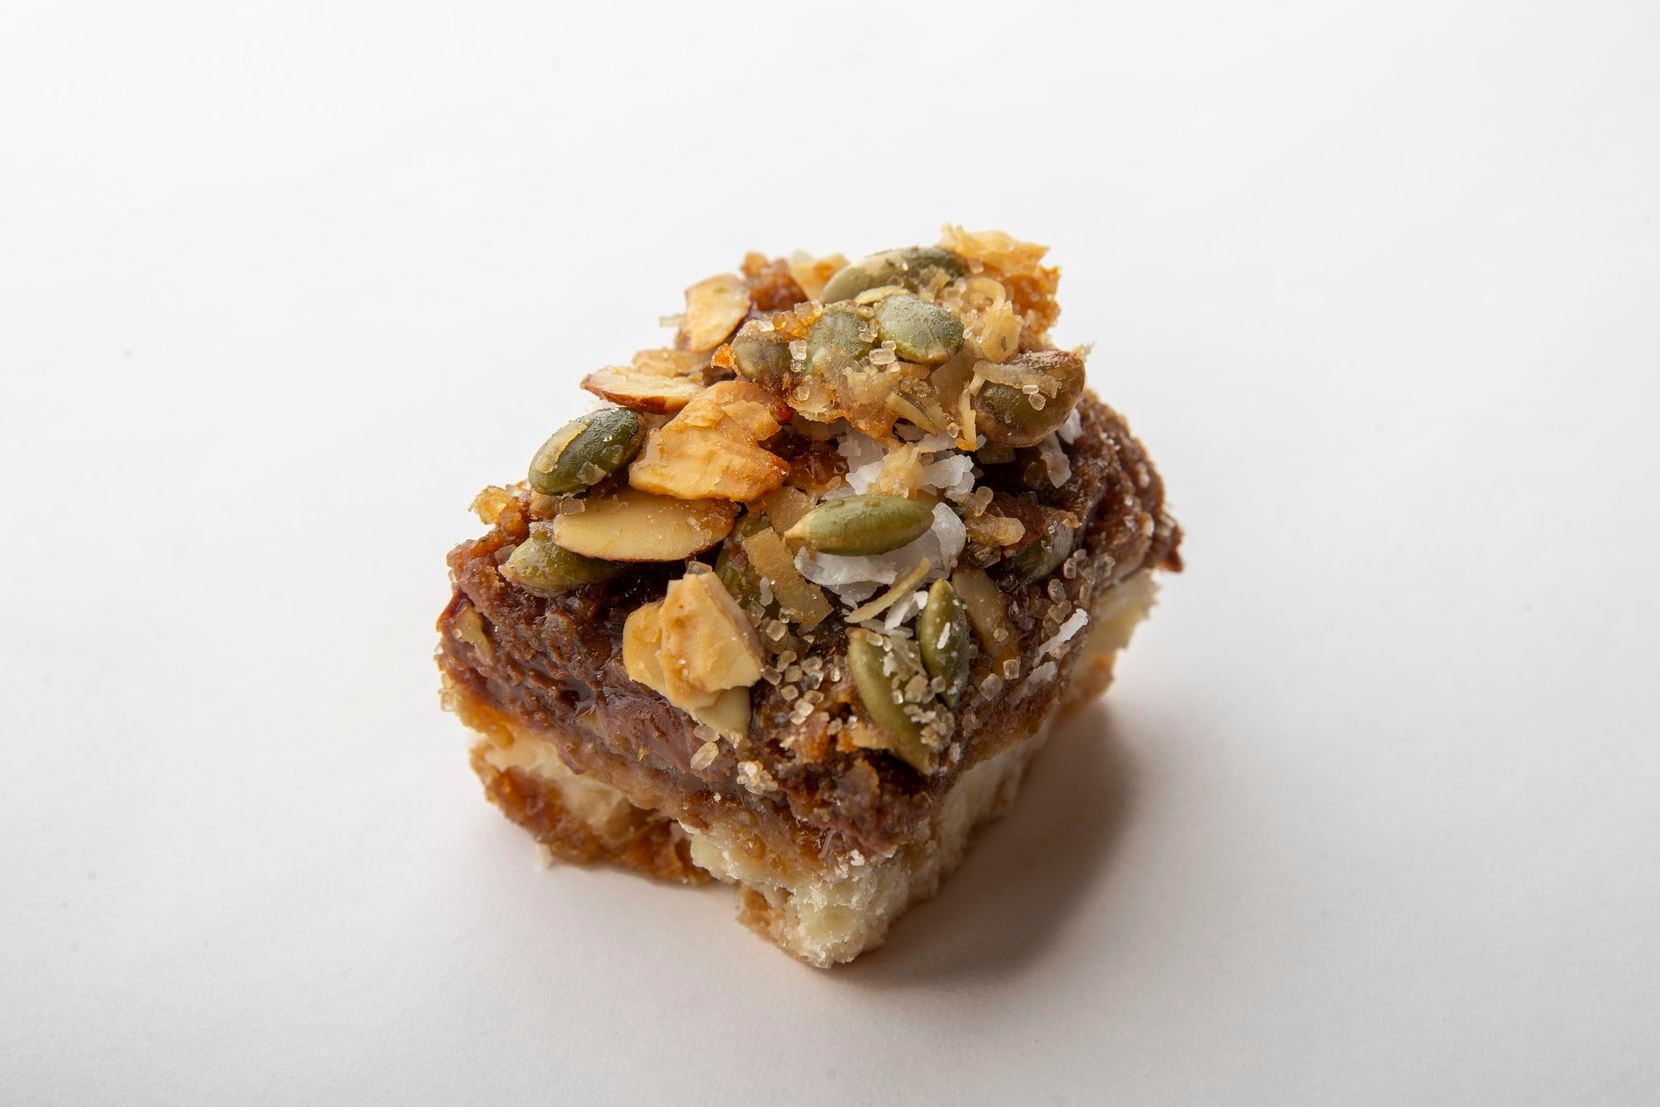 The Buena Onda spicy almond-pepita and pilloncillo cluster bars made by Rex Poland 